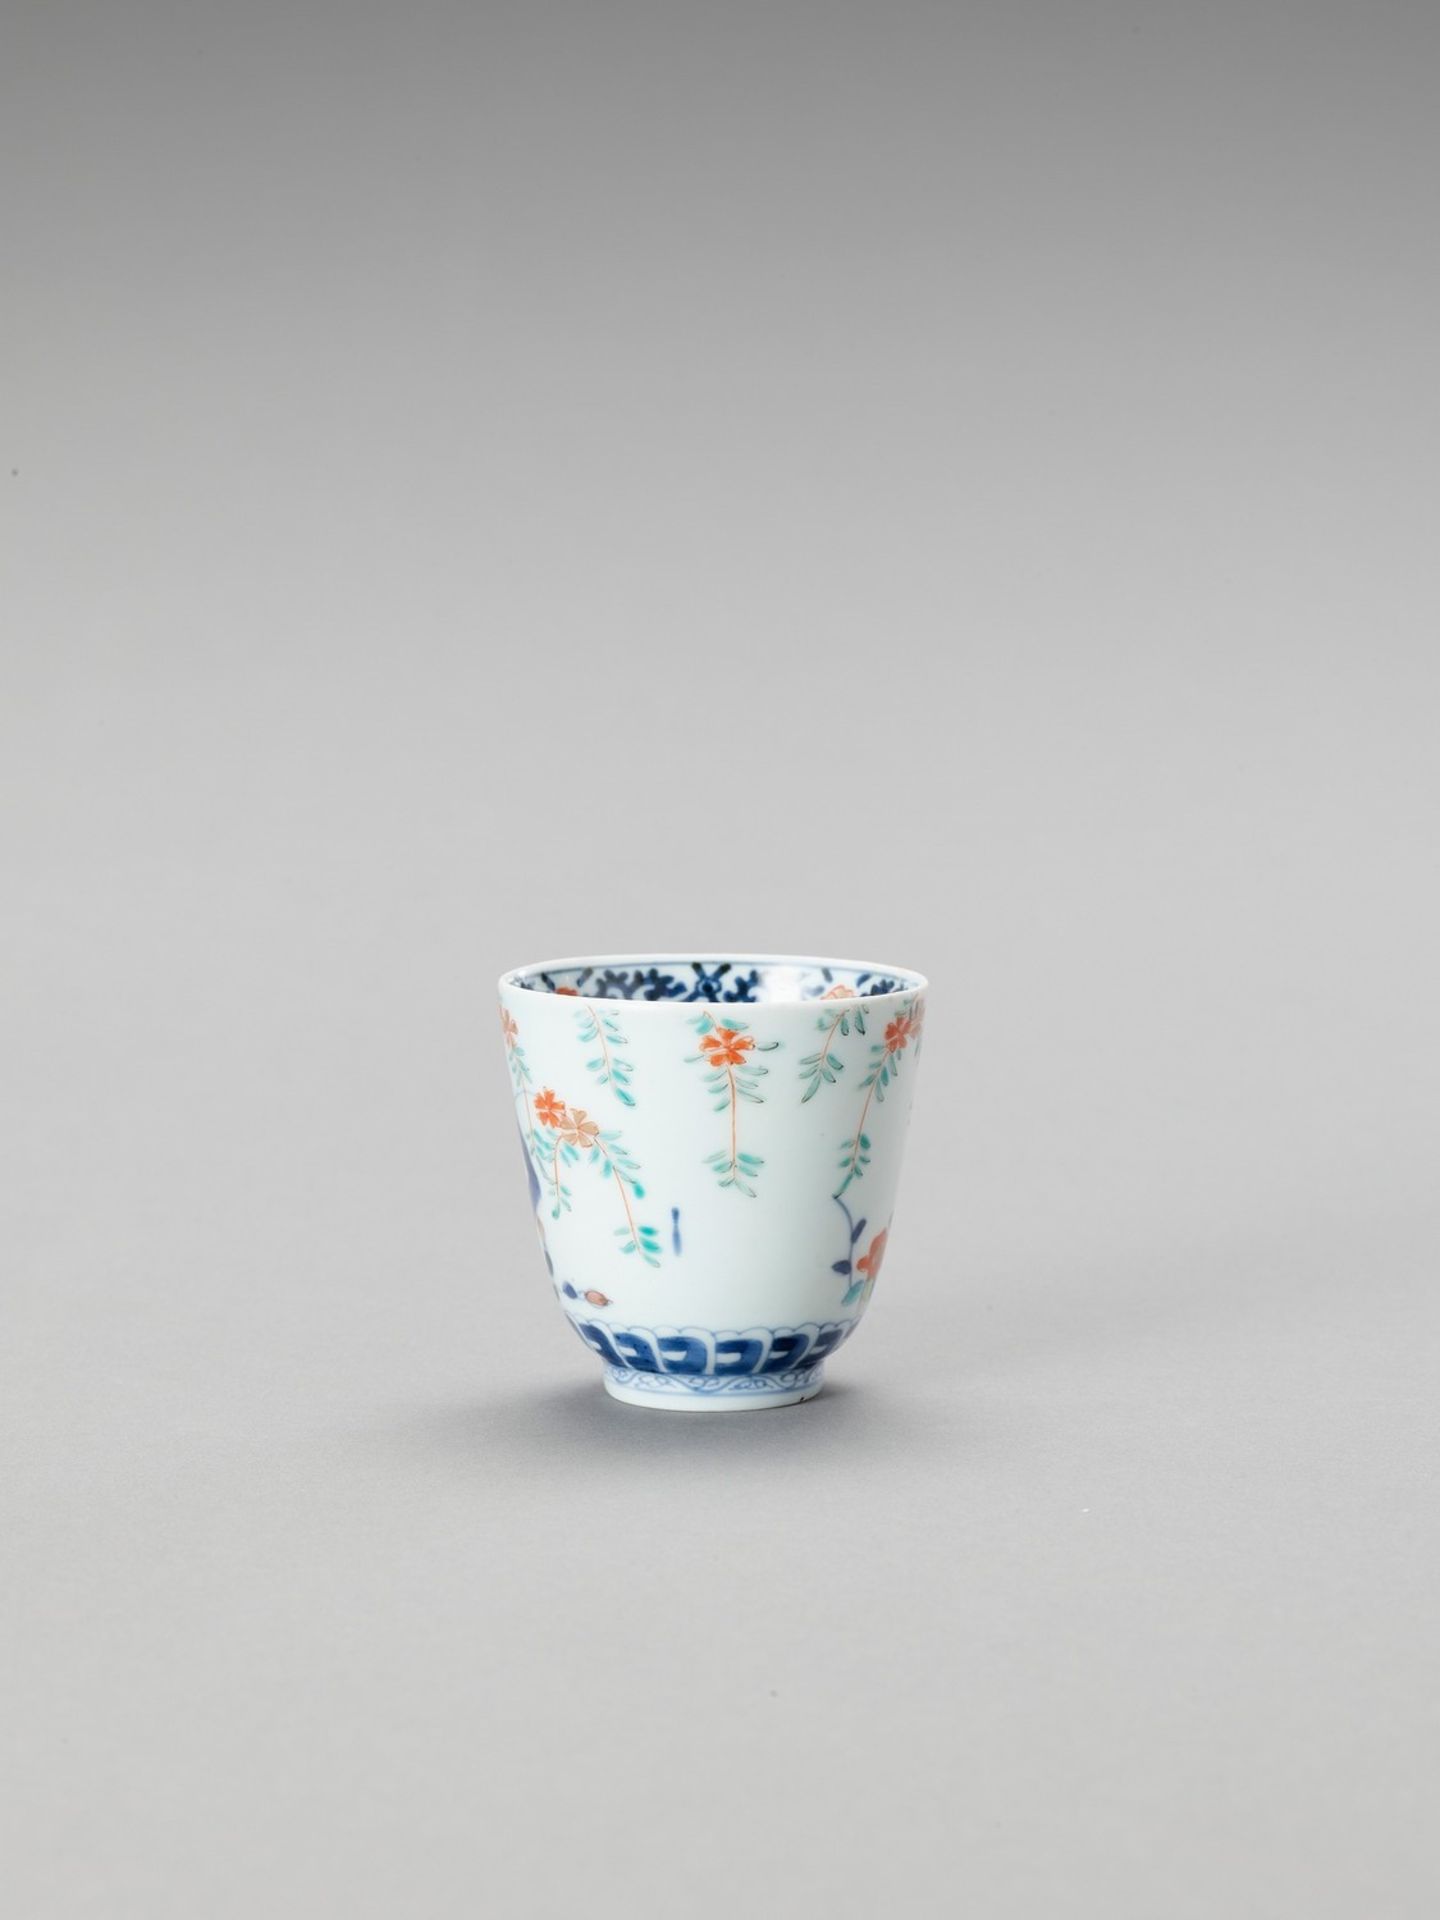 A SMALL KAKIEMON PORCELAIN CUP - Image 4 of 6